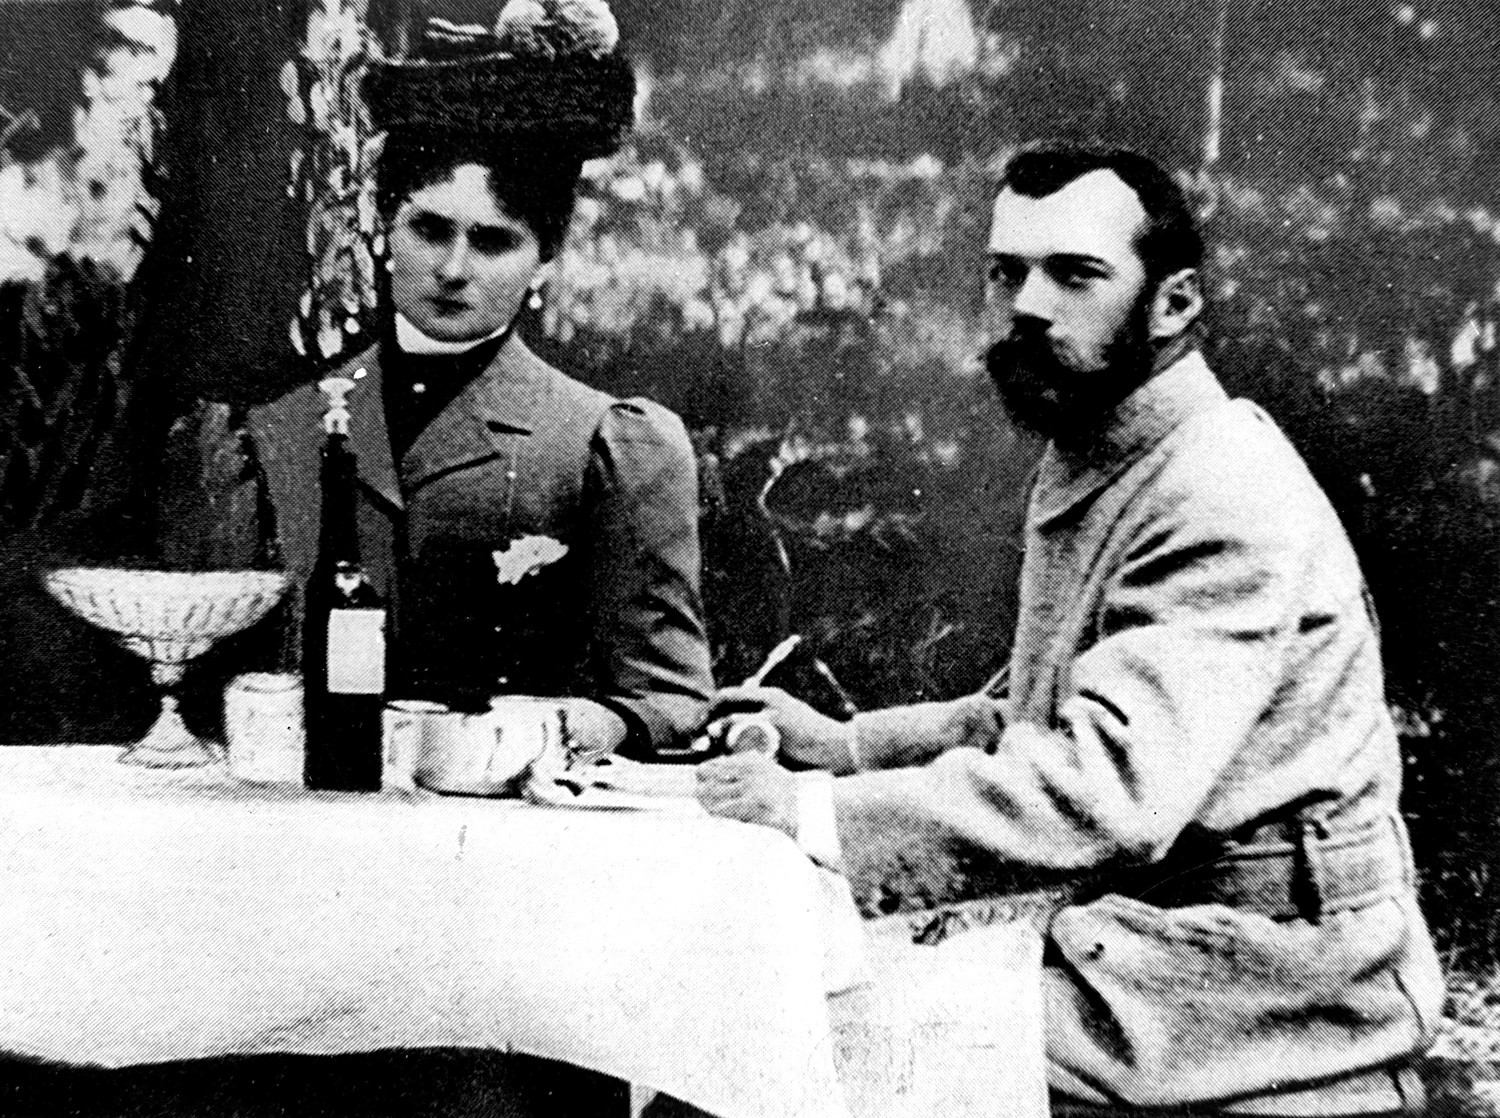 Nicholas II and his wife Alexandra Fedorovna at the table